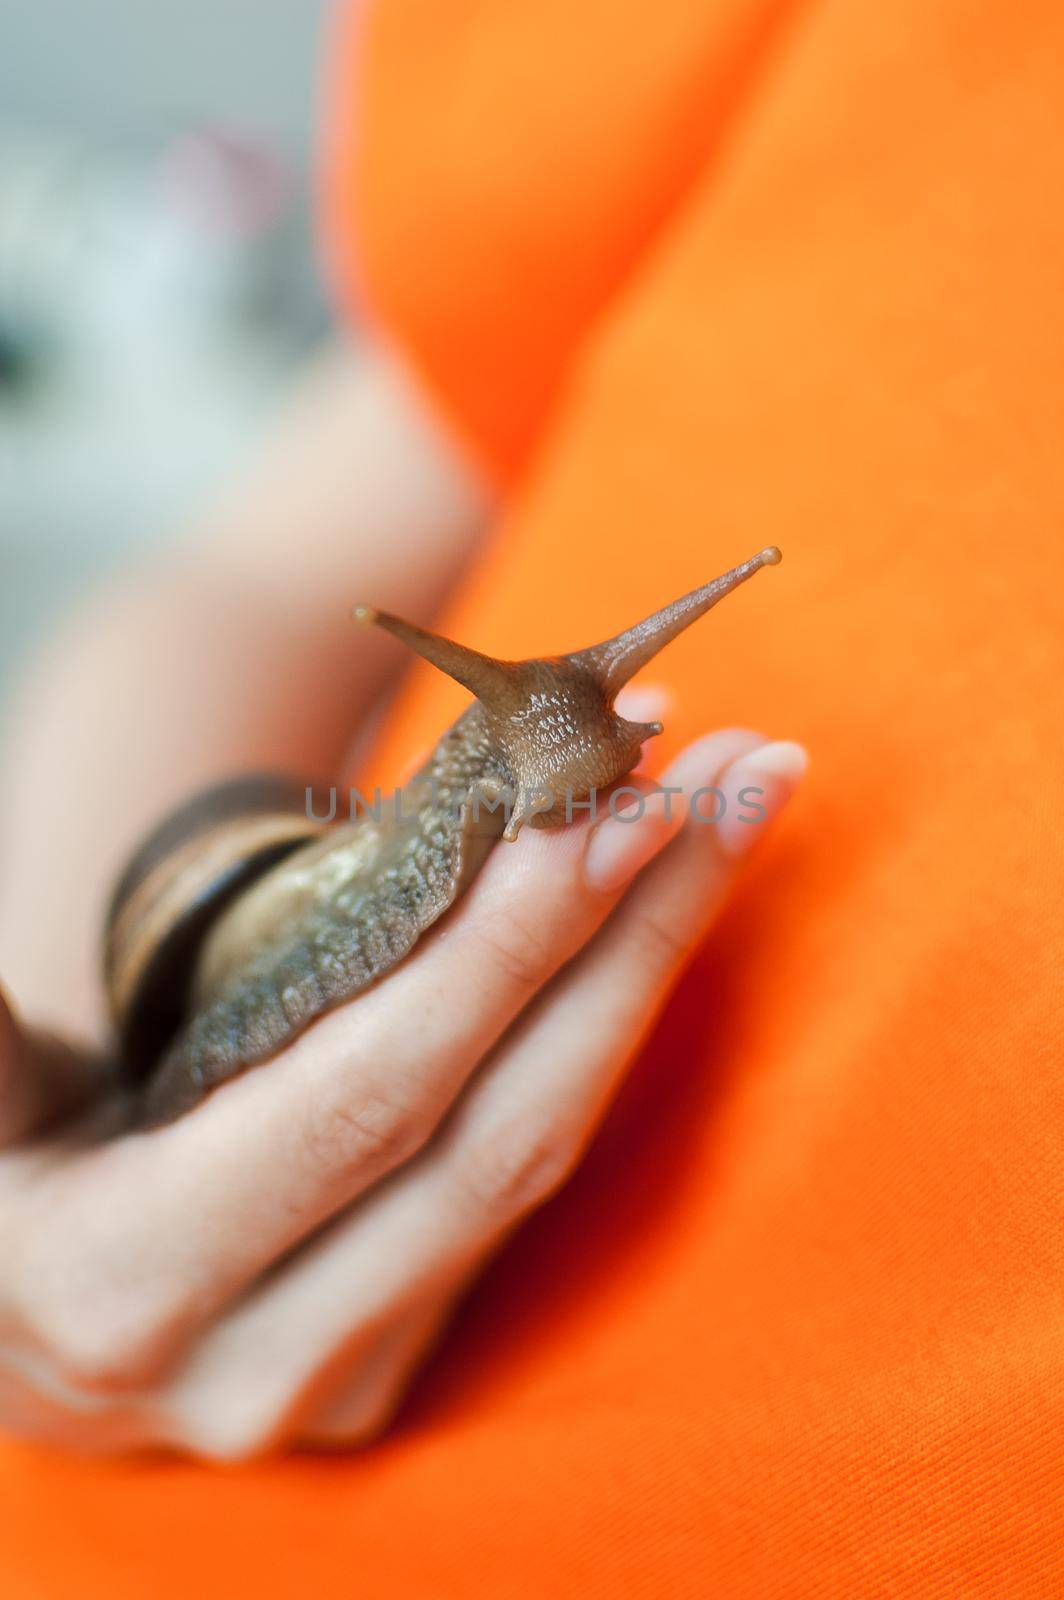 Dark brown snail achatina is hold by female hands, orange background, animal pets concept. by balinska_lv